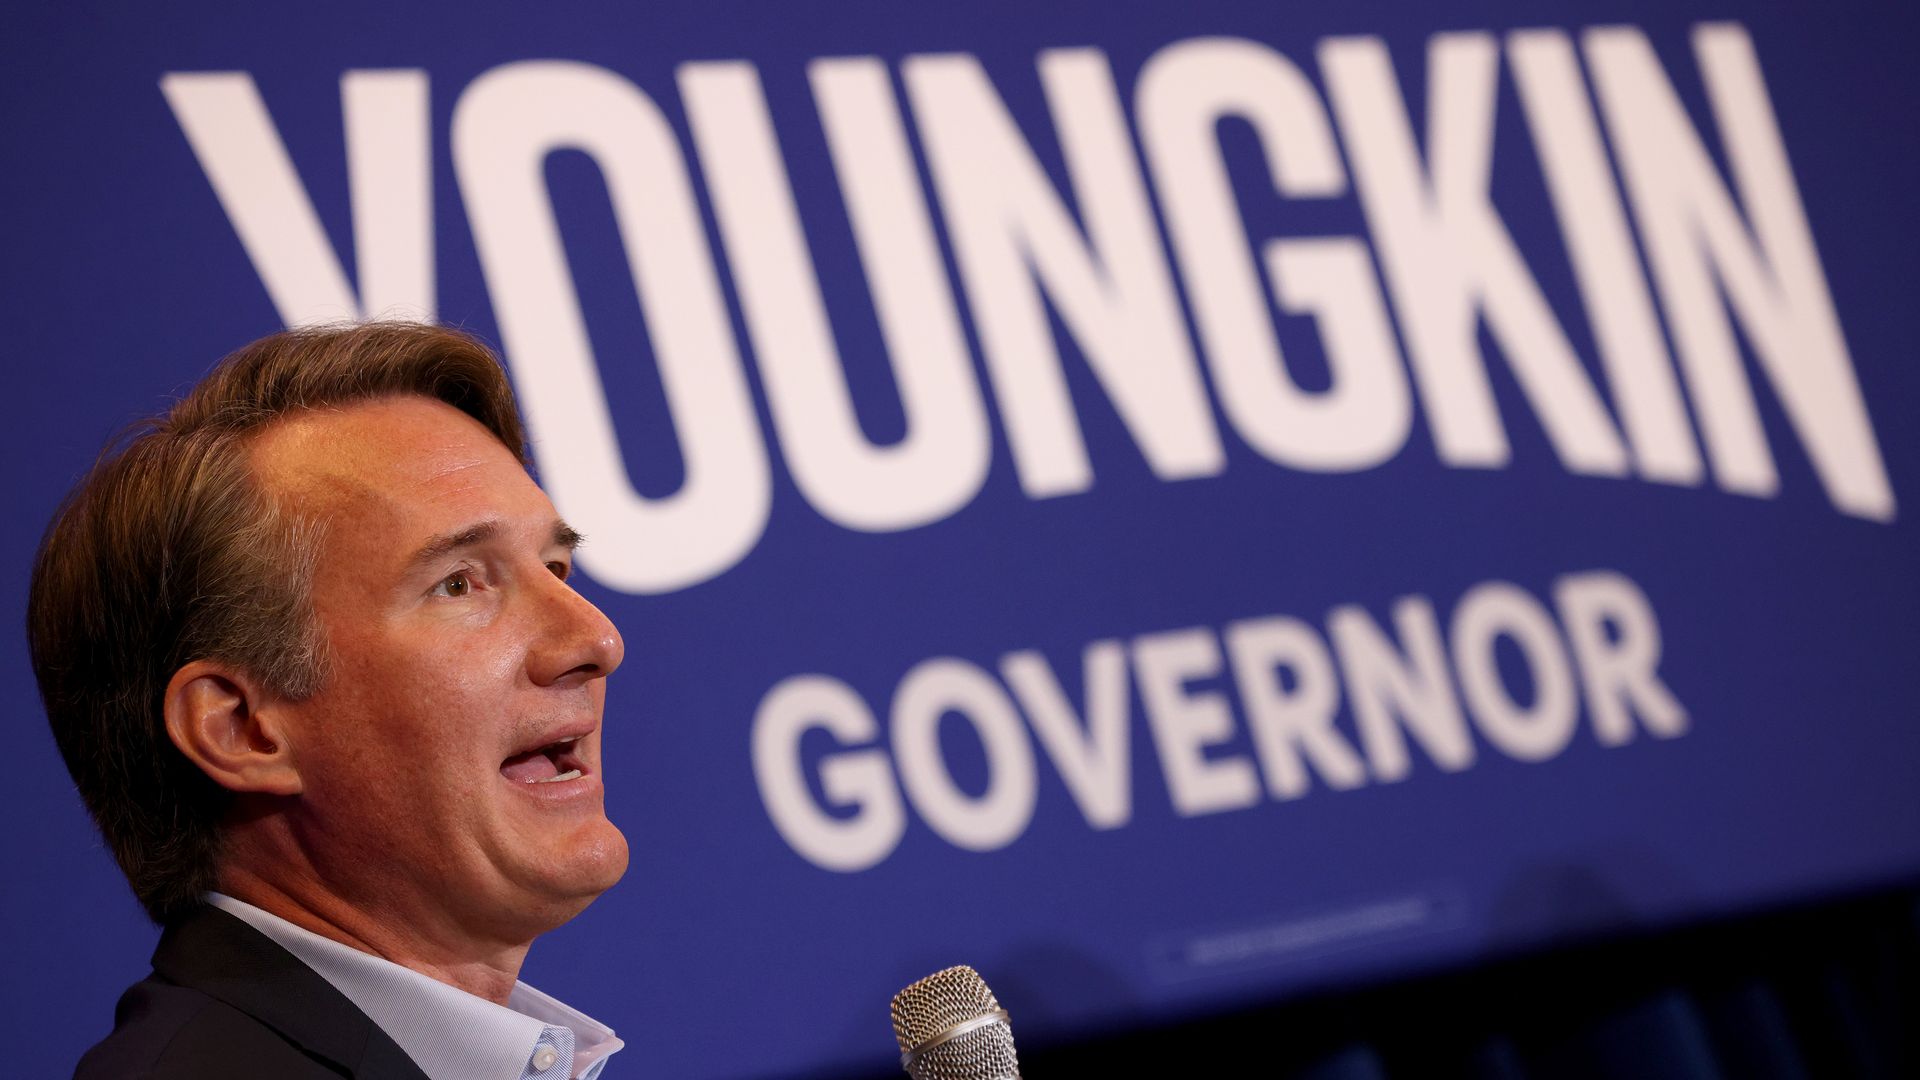 Virginia gubernatorial candidate Glenn Youngkin is seen at a campaign event.